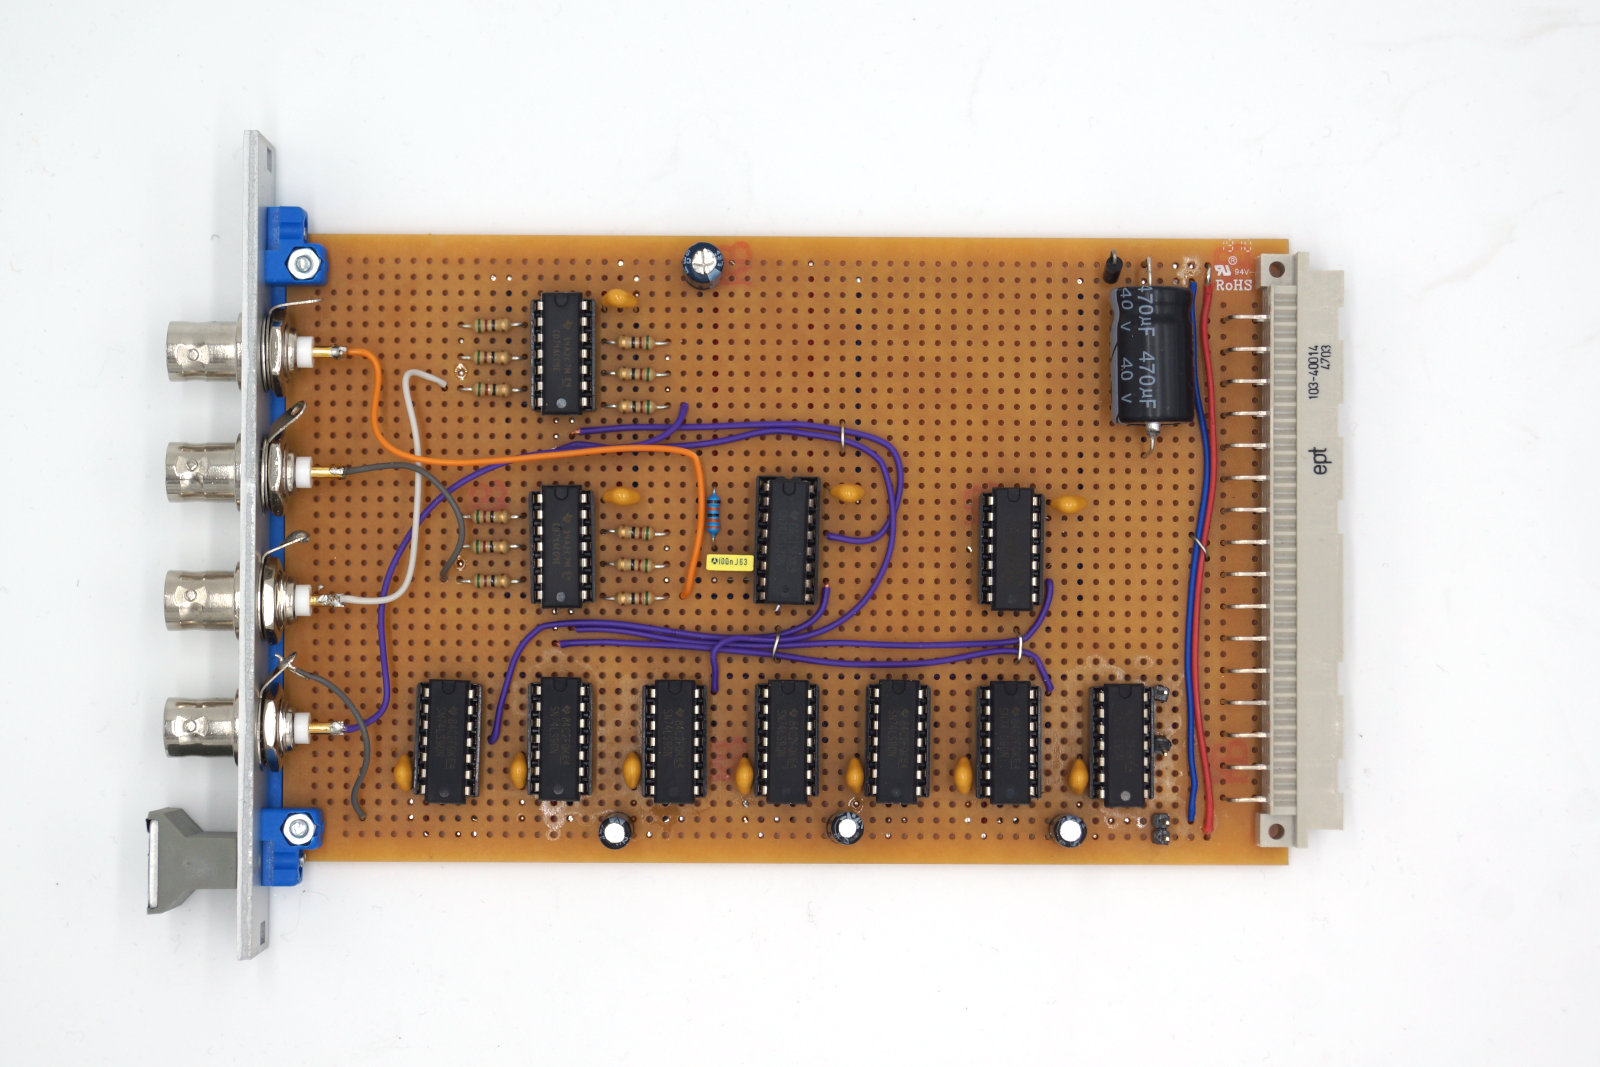 Clock divider board overview